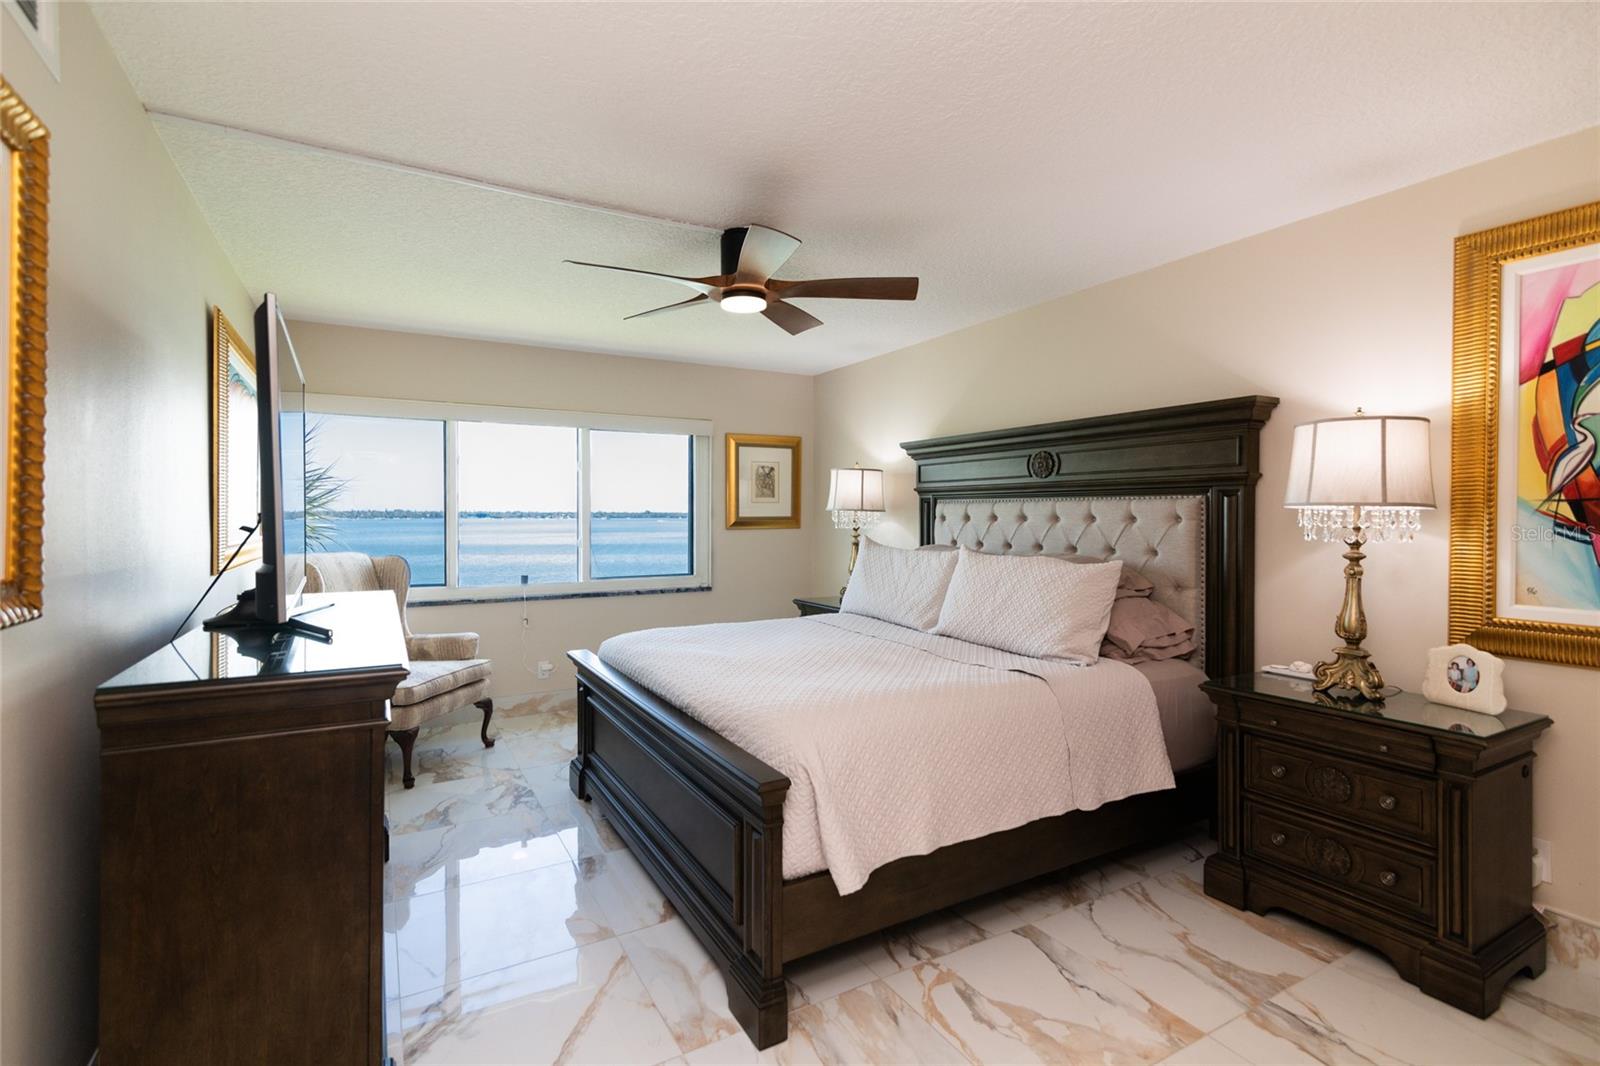 Primary bedroom - wake up to that gorgeous view of Boca Ciega Bay